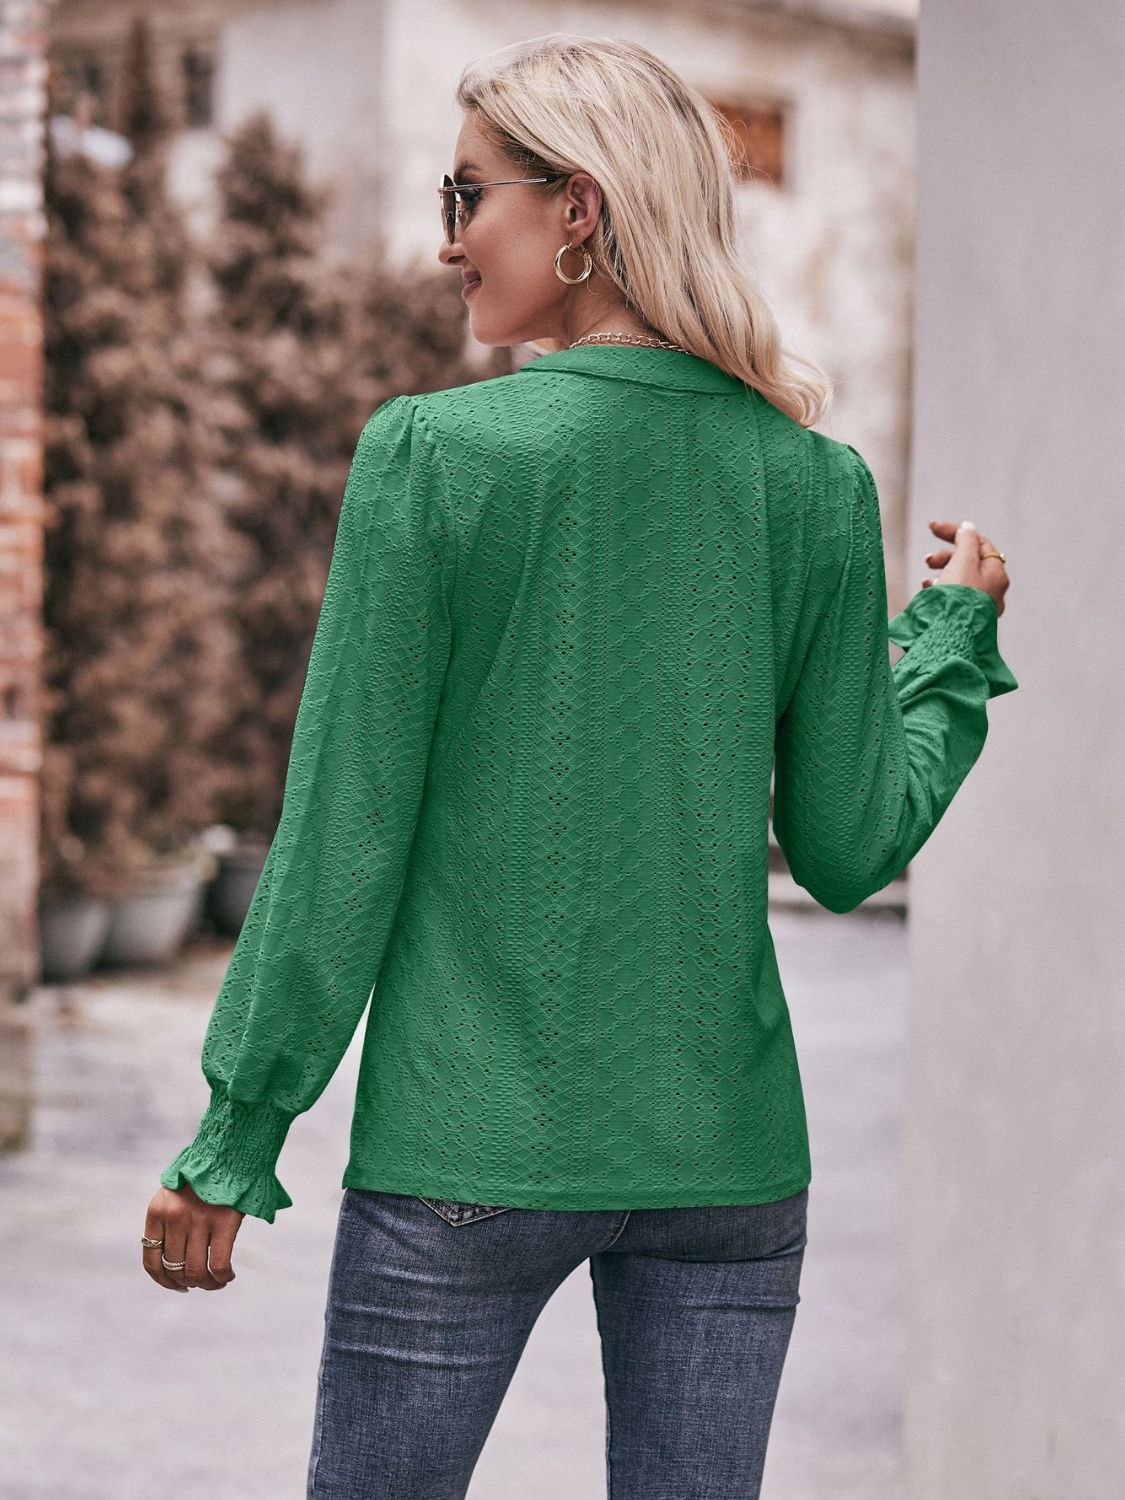 Double Take Eyelet Notched Neck Flounce Sleeve Blouse | CLOTHING,SHOES & ACCESSORIES | Double Take, plus size, Ship From Overseas, top, Tops & Shirts, Women's Apparel, women's clothing, women's fashion | Trendsi